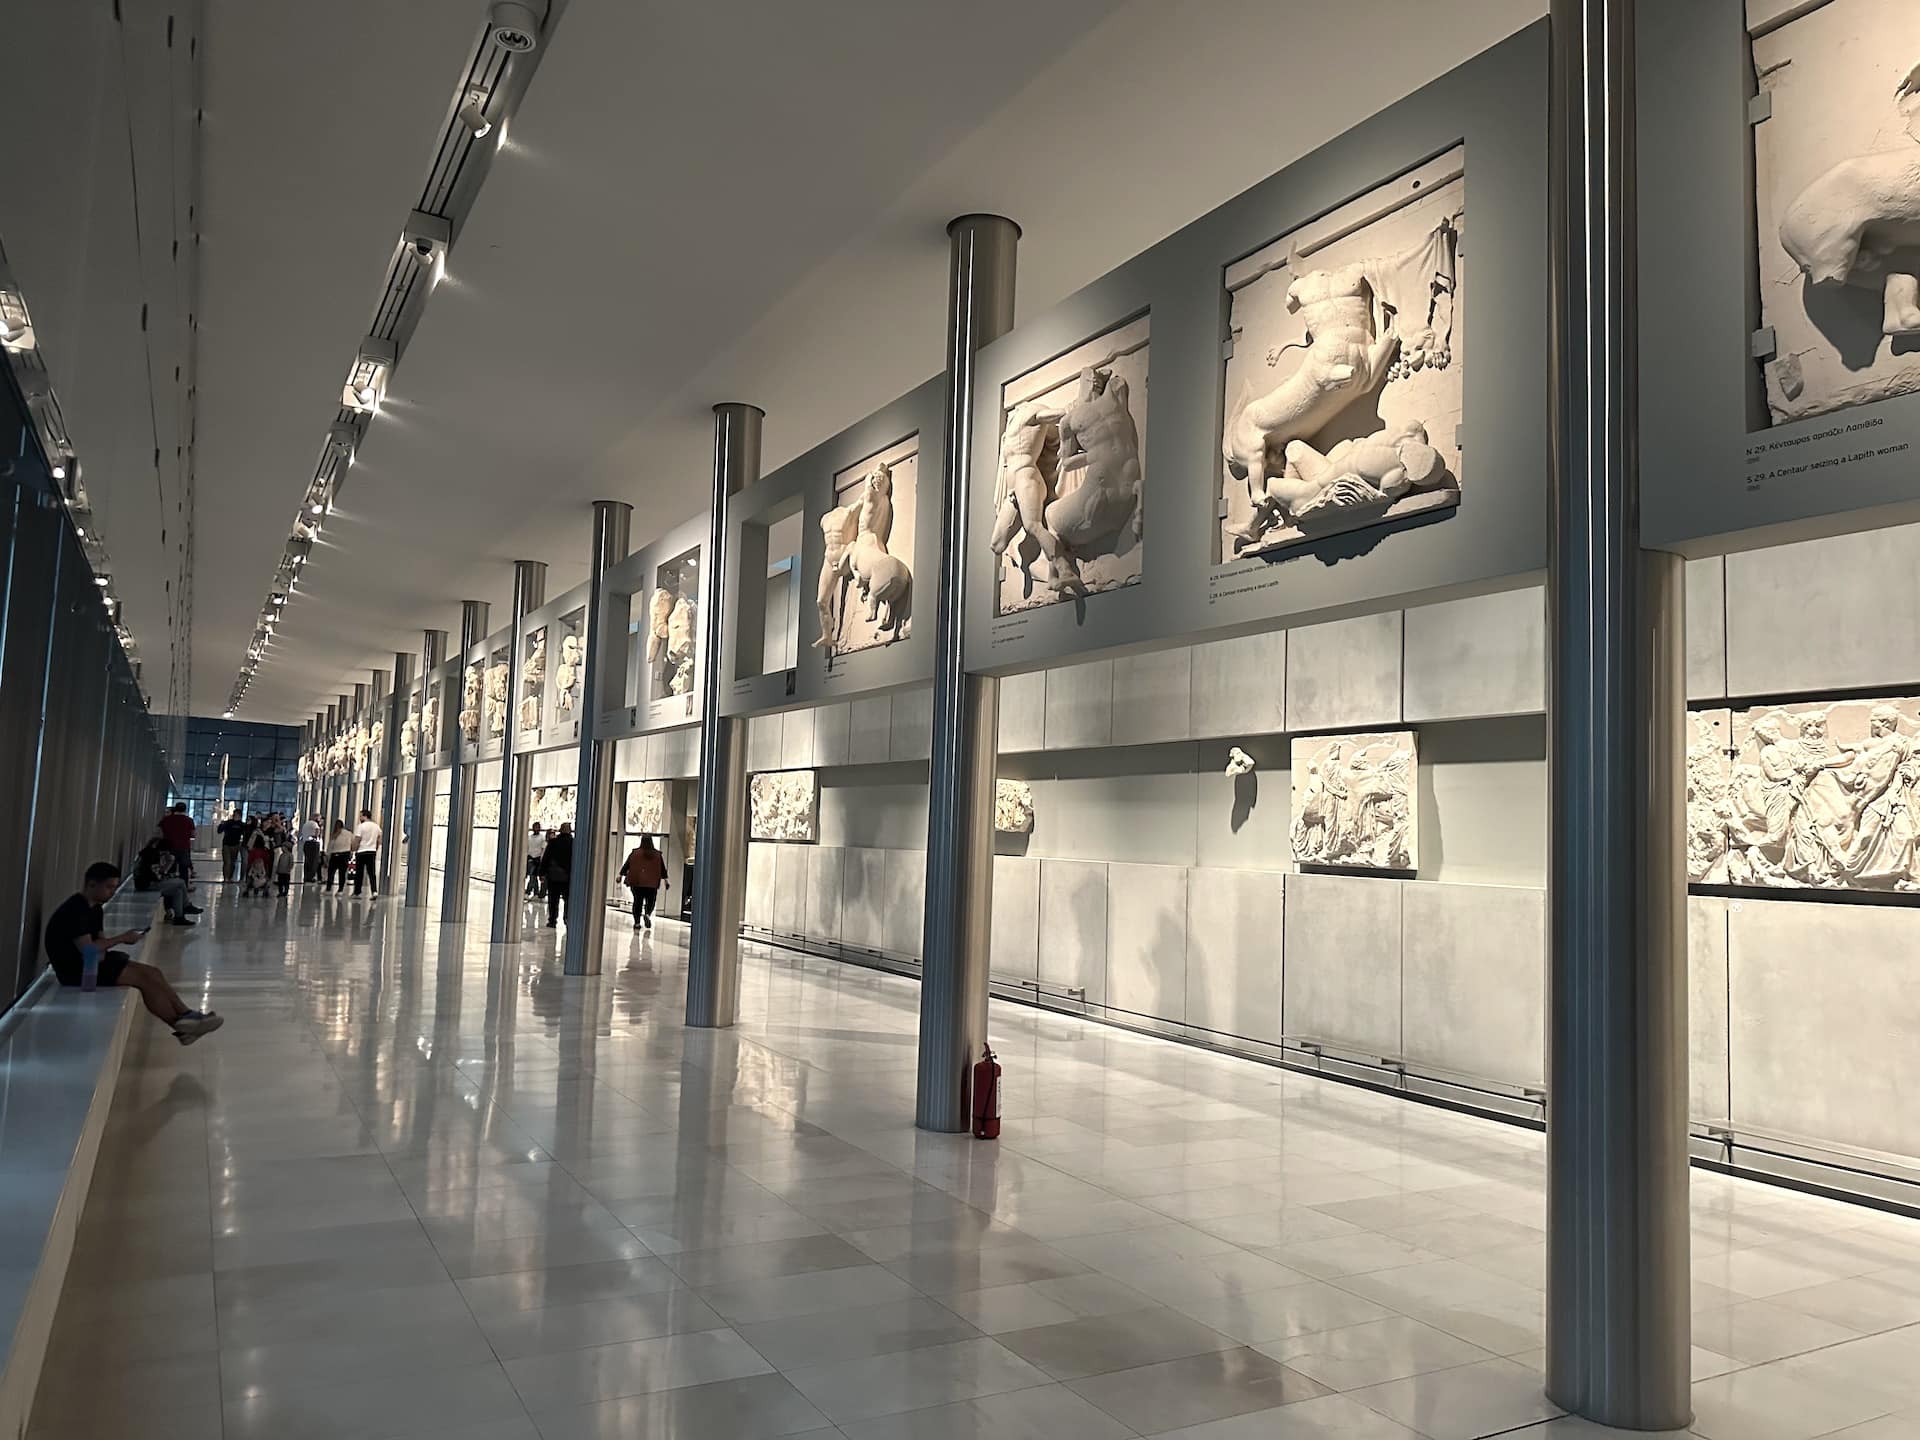 South metopes of the Parthenon at the Acropolis Museum in Athens, Greece